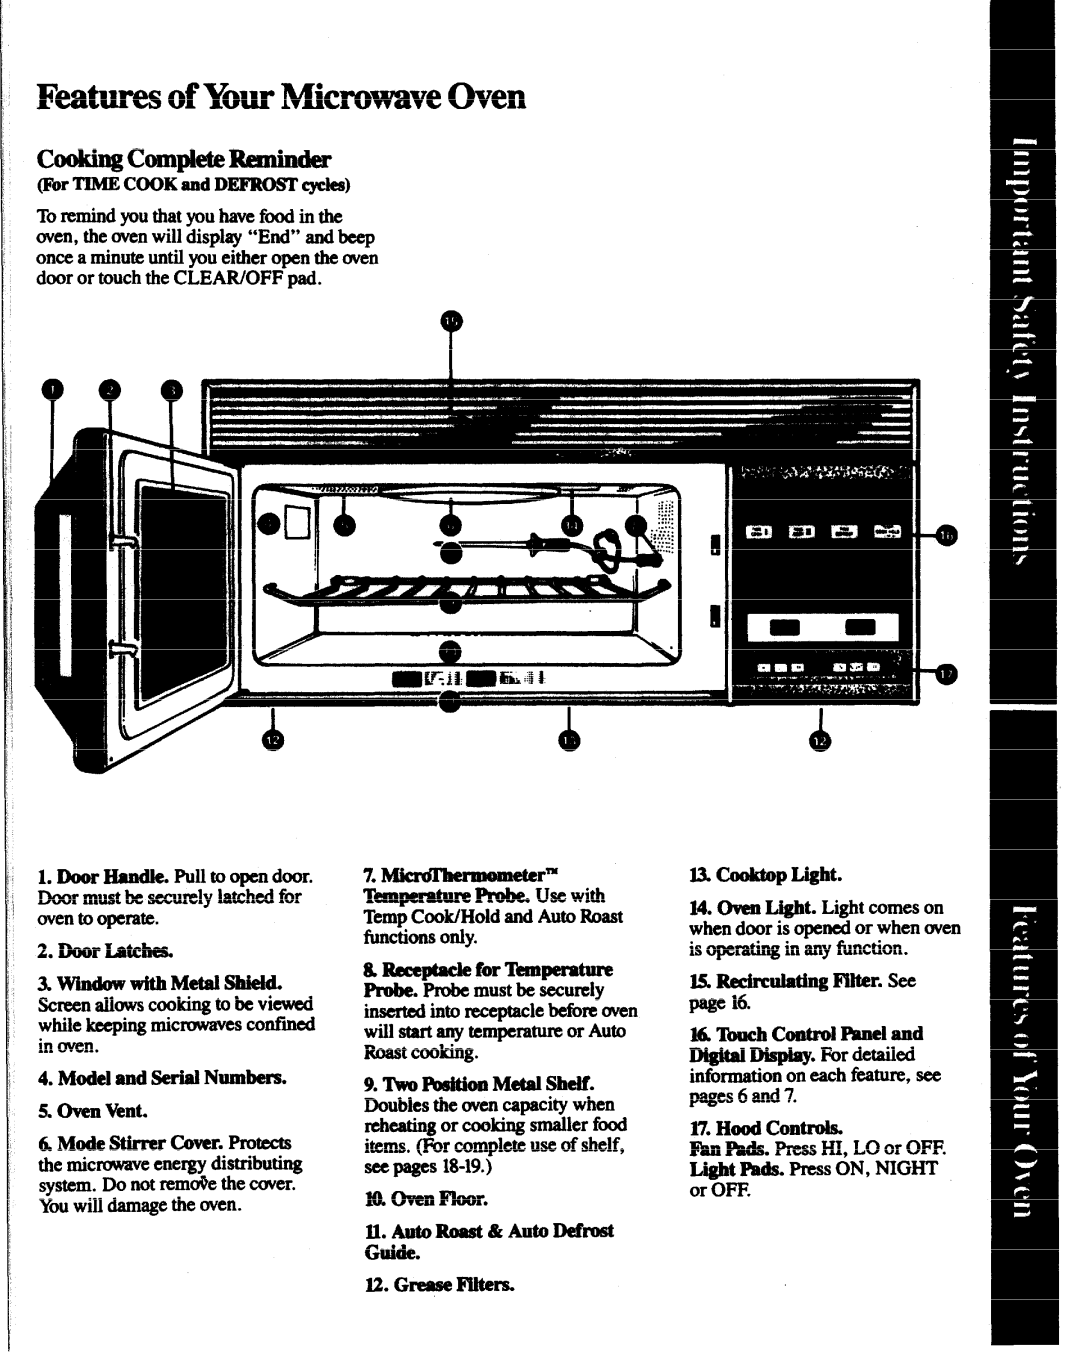 GE JVM141G manual Features of Your Microwave Oven, cookingGDx’npleteRemhMkr, Mode StirrerCover.Protects, 7.~r” 